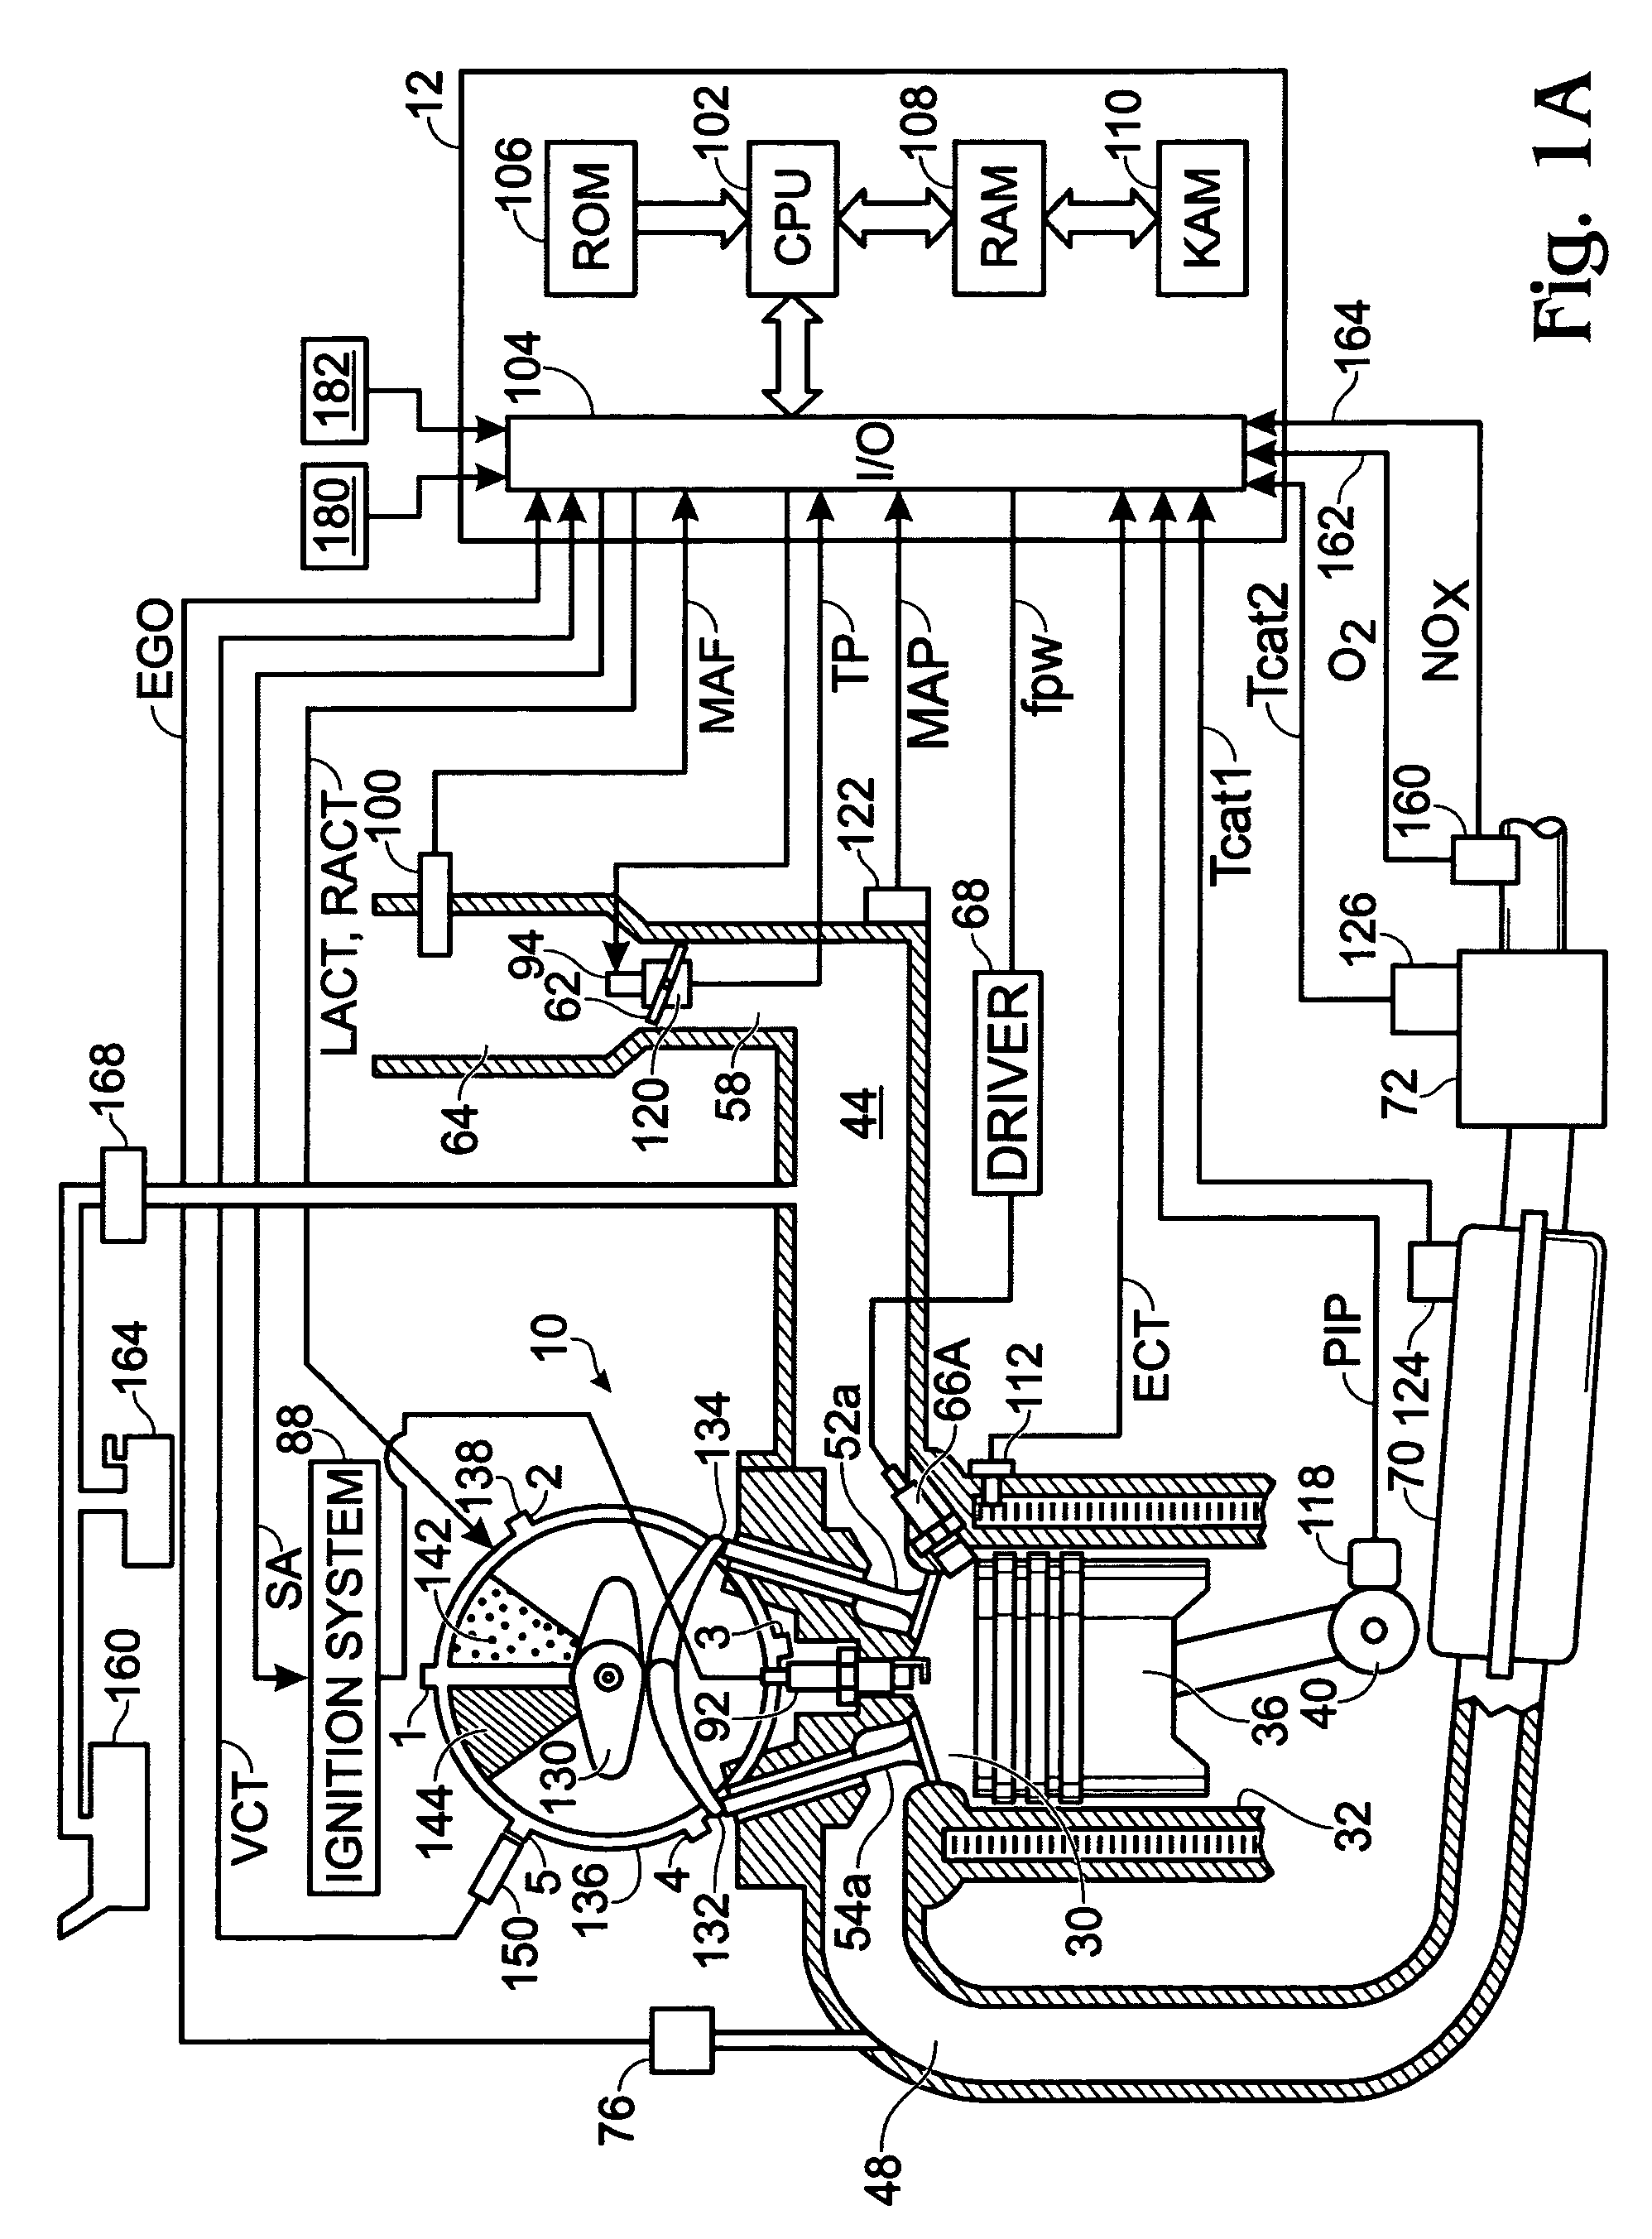 Vibration-based NVH control during idle operation of an automobile powertrain